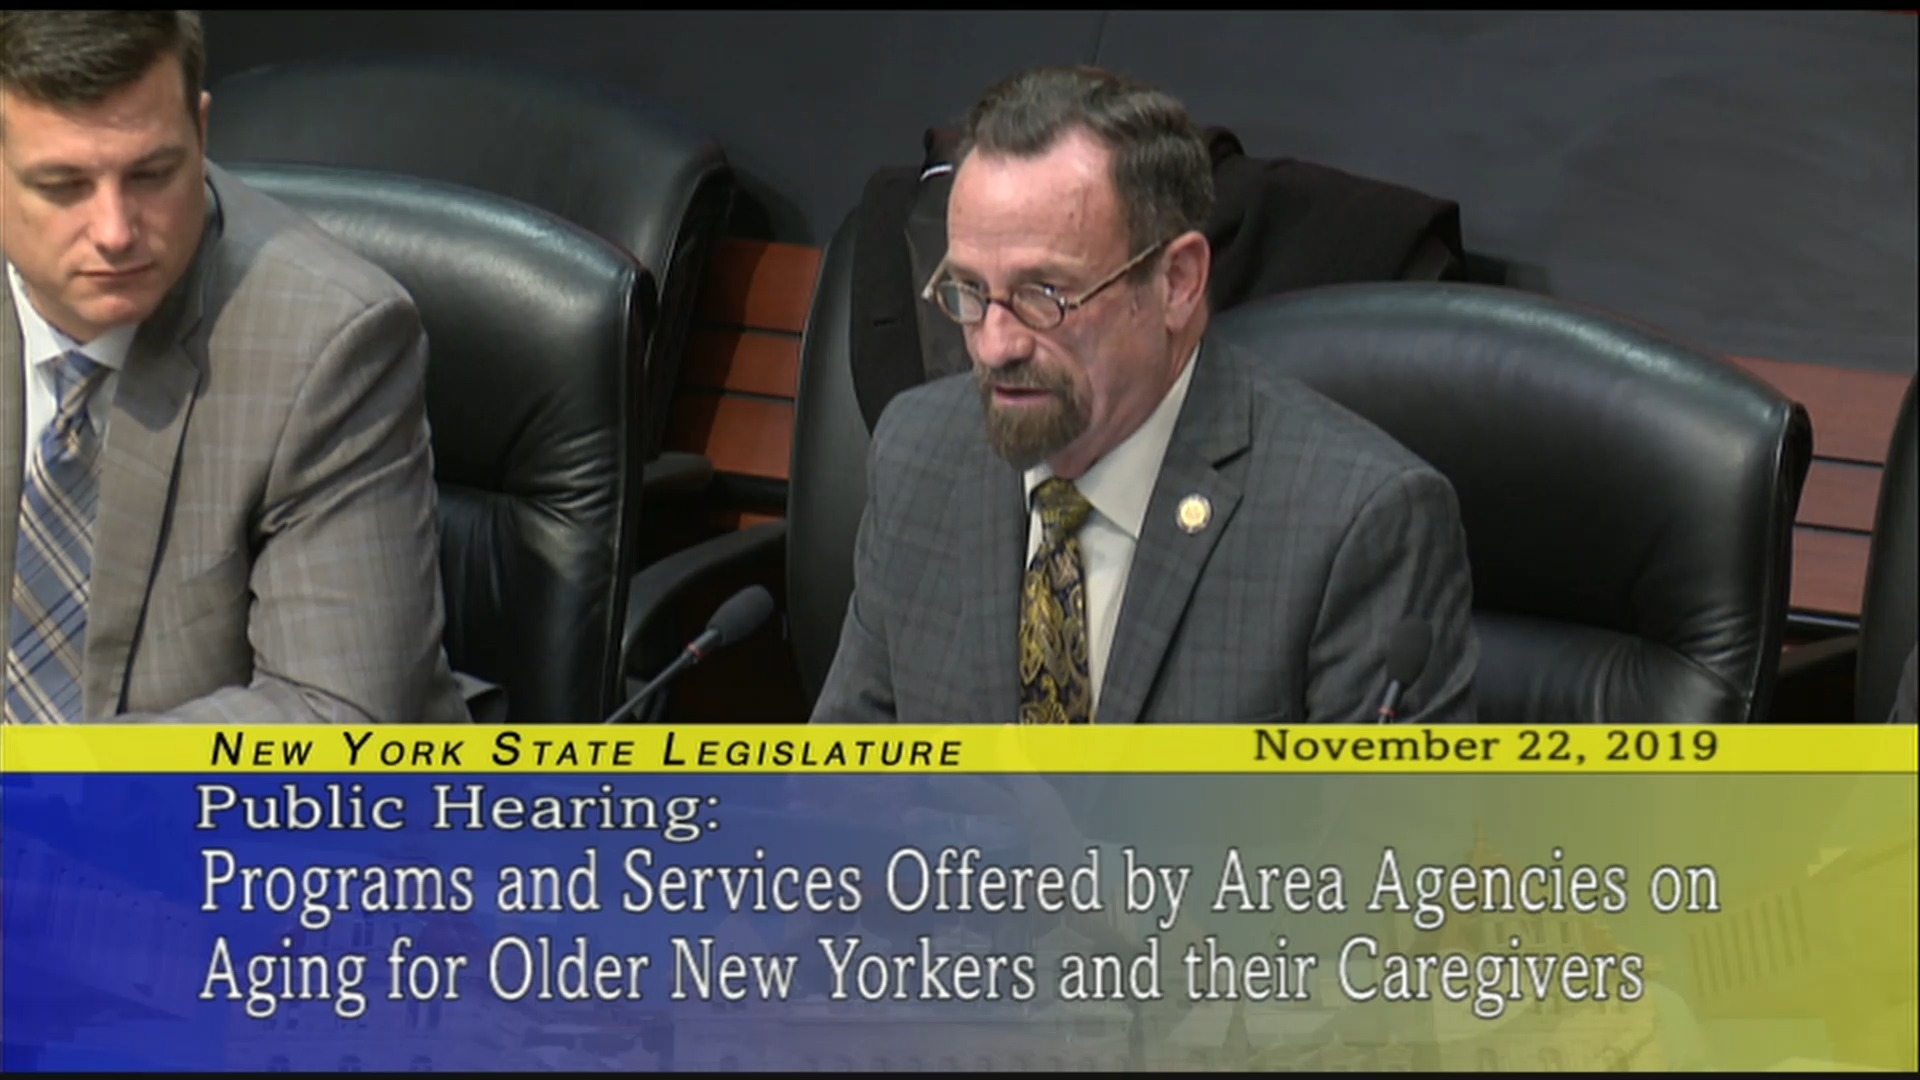 Public Hearing On Programs And Services For Aging New Yorkers (1)